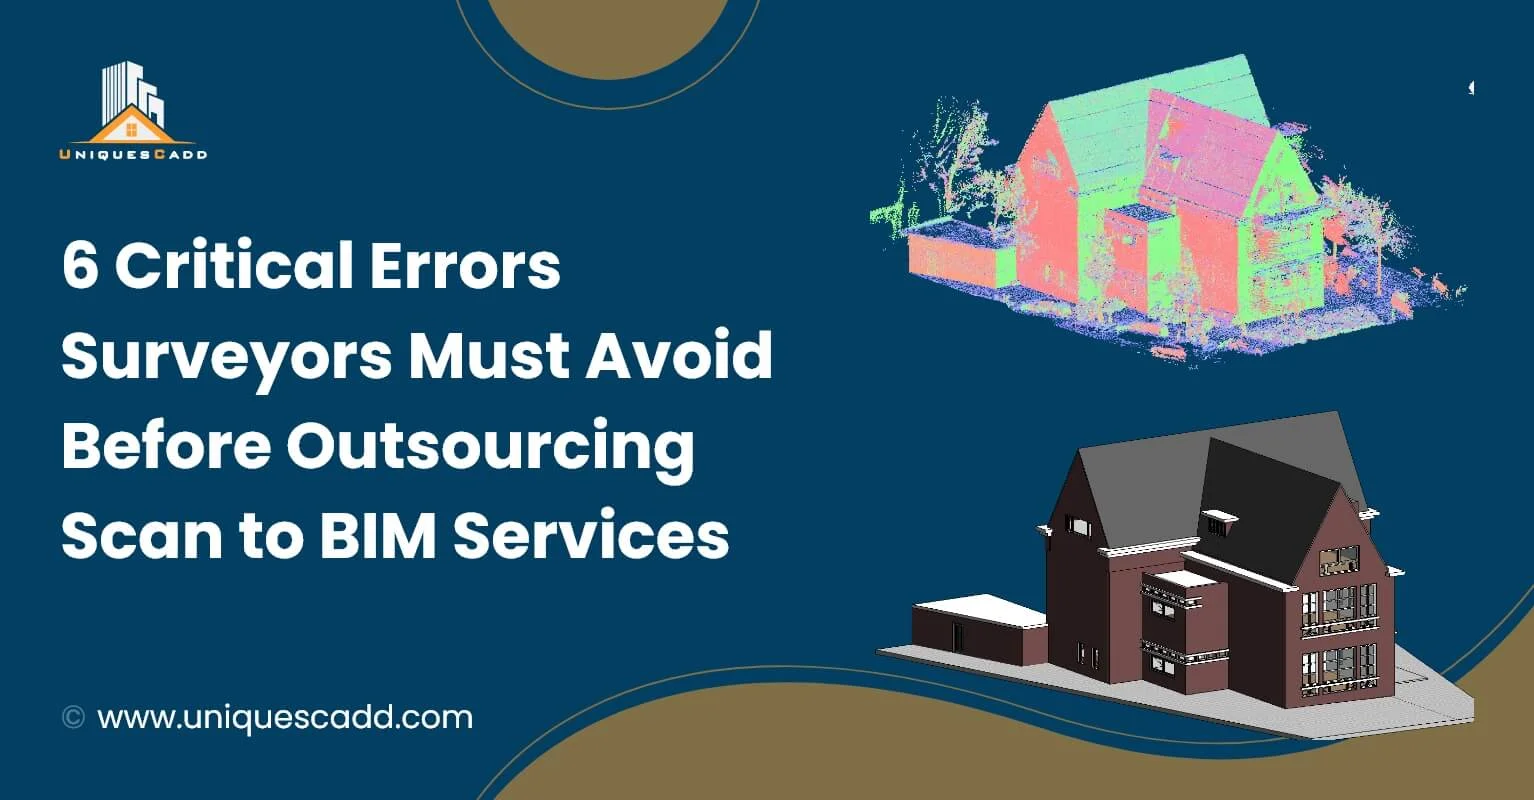 6 Critical Errors Surveyors Must Avoid Before Outsourcing Scan to BIM Services